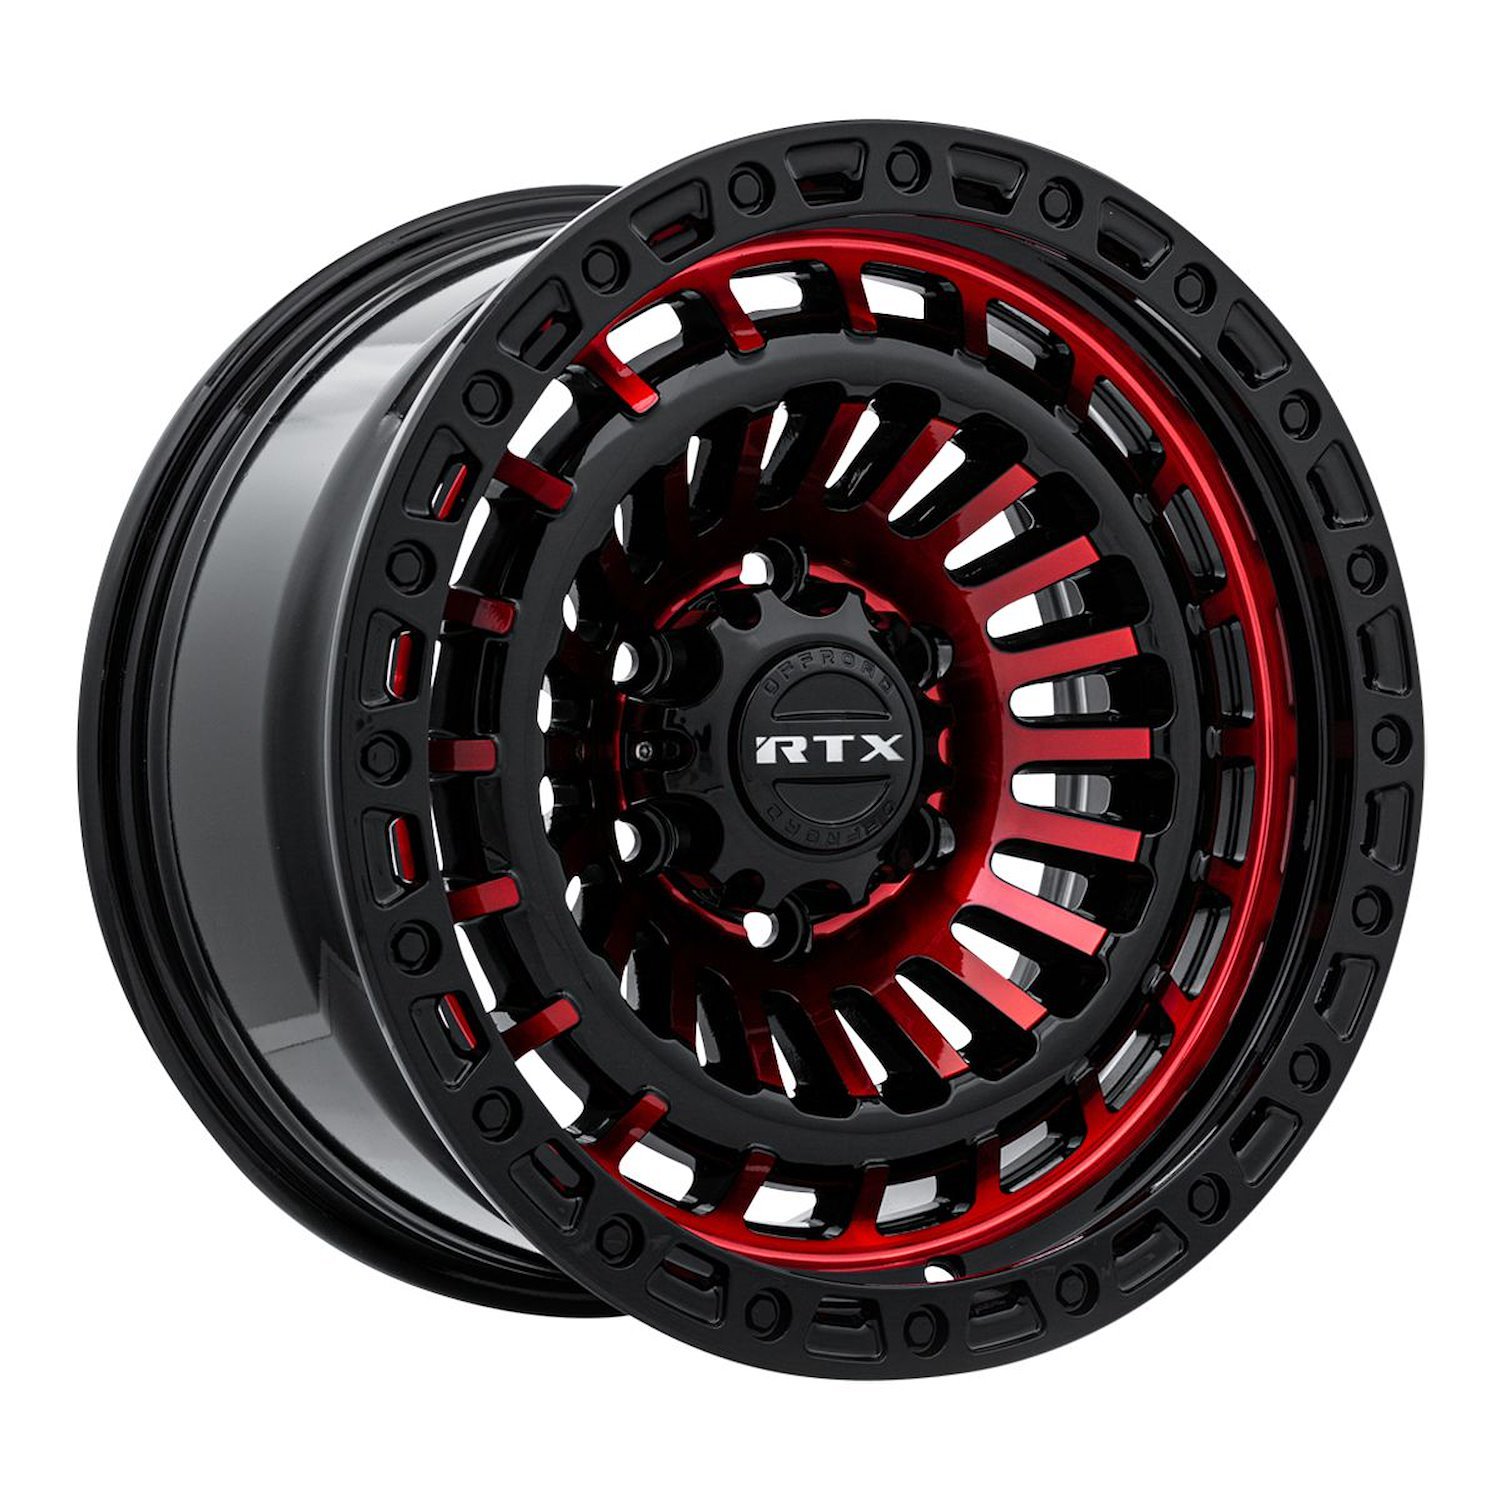 083092 Off-Road Series Moab Wheel [Size: 17" x 9"] Gloss Black Machined Red Lip Finish